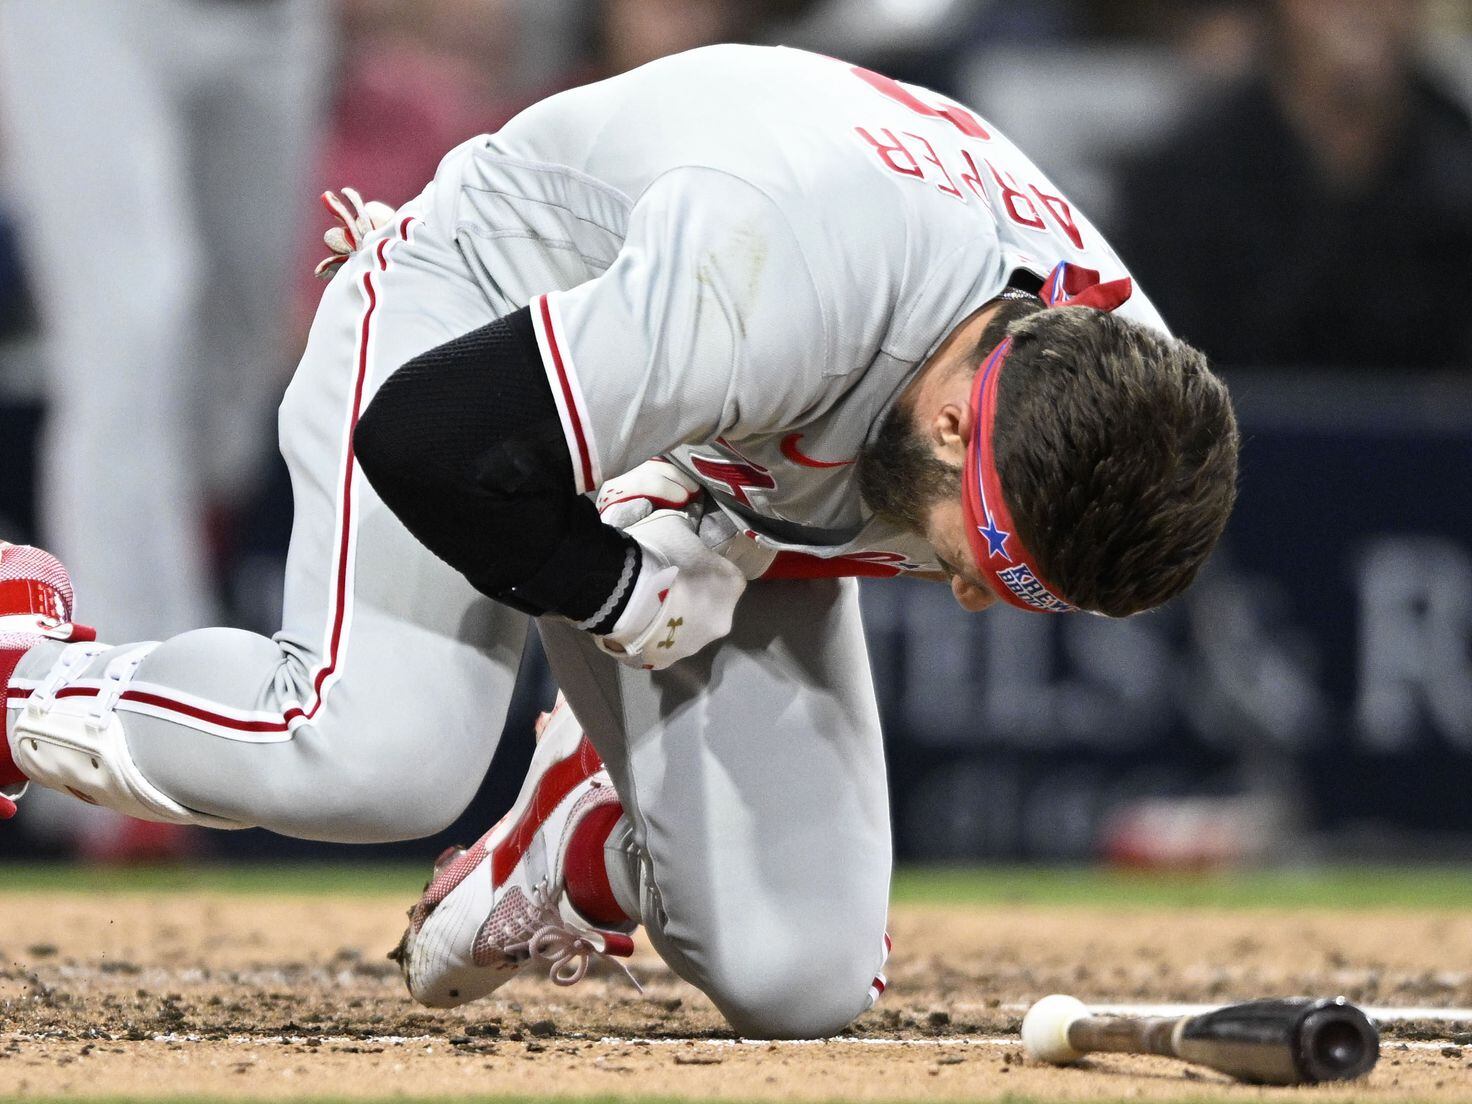 Bryce Harper Harper excited for a warm welcome in first home game